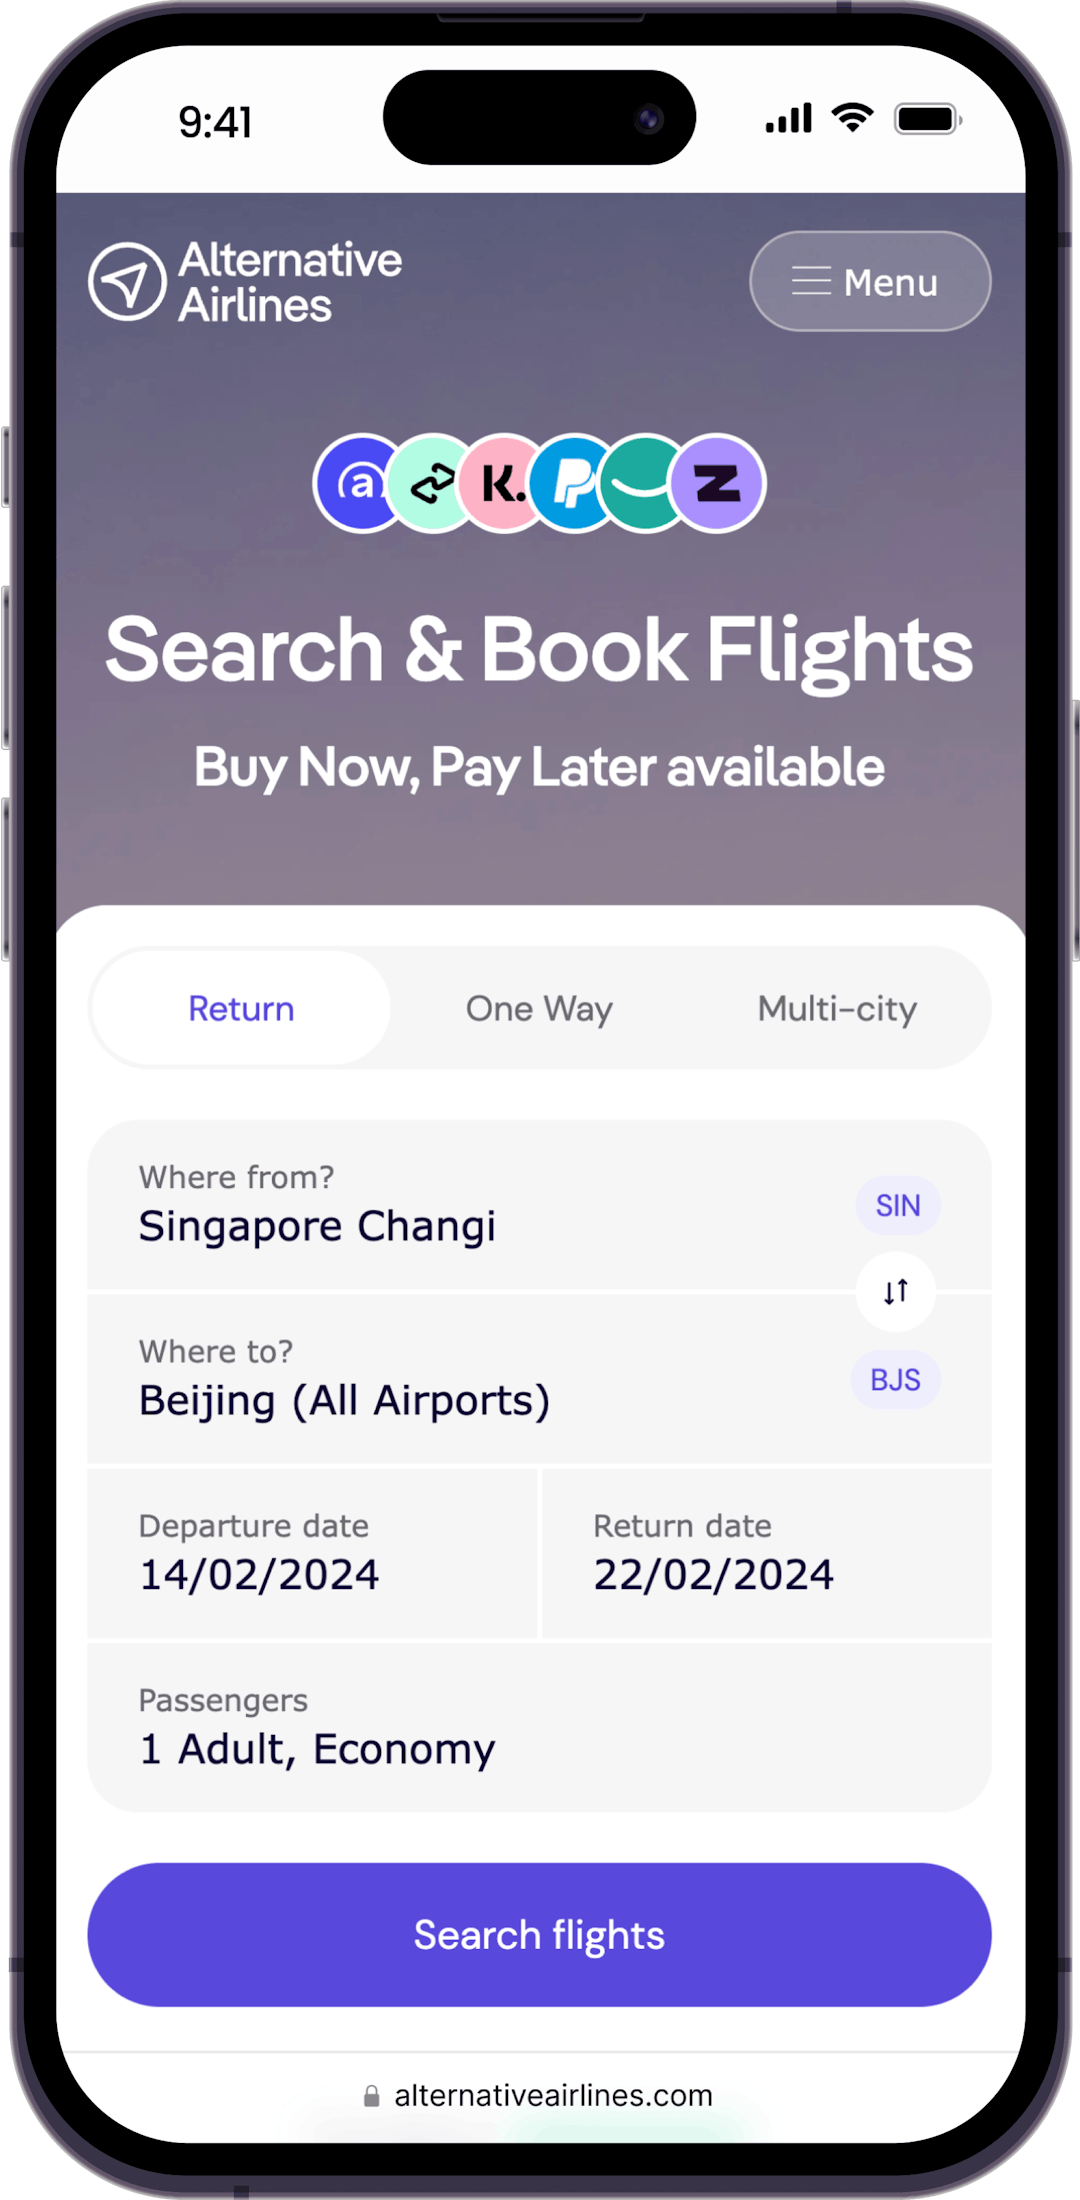 Step 1 - search for flights using the search form